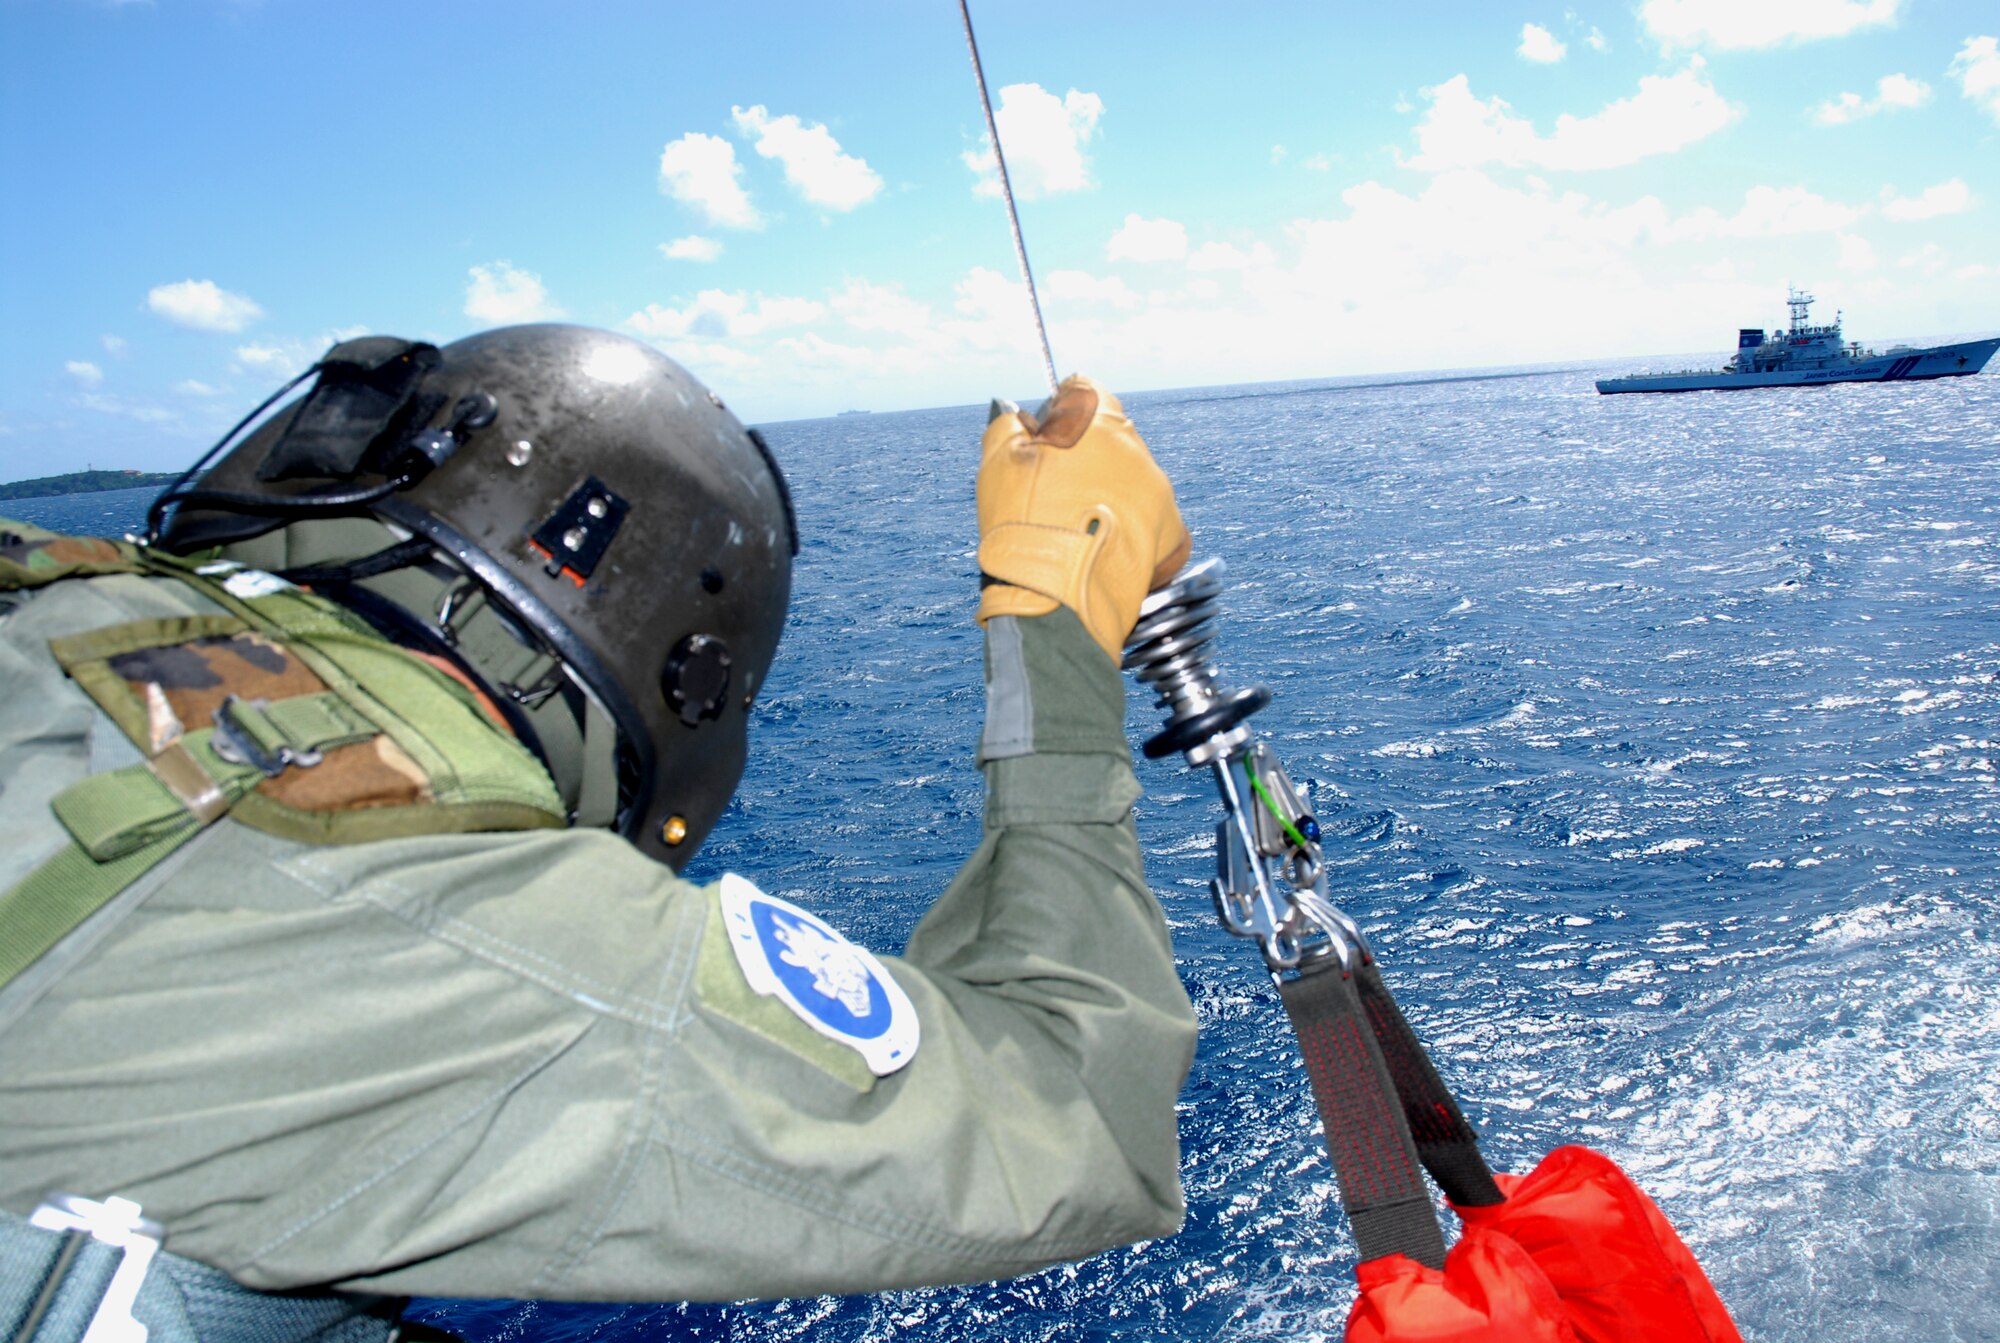 Master Sgt. Ernest Garcia, a flight engineer assigned to the 33rd Rescue Squadron, waits for a signal from the Pararescue Airman in the water to bring the downed pilot onboard an HH-60 during a crisis management exercise off the coast of Okinawa Oct. 8 2008. Members of the 18th Wing and Japanese Coast Guard rehearsed response procedures for a simulated over the water aircraft accident. (U.S. Air Force photo/Staff Sgt. Chrissy Best)
